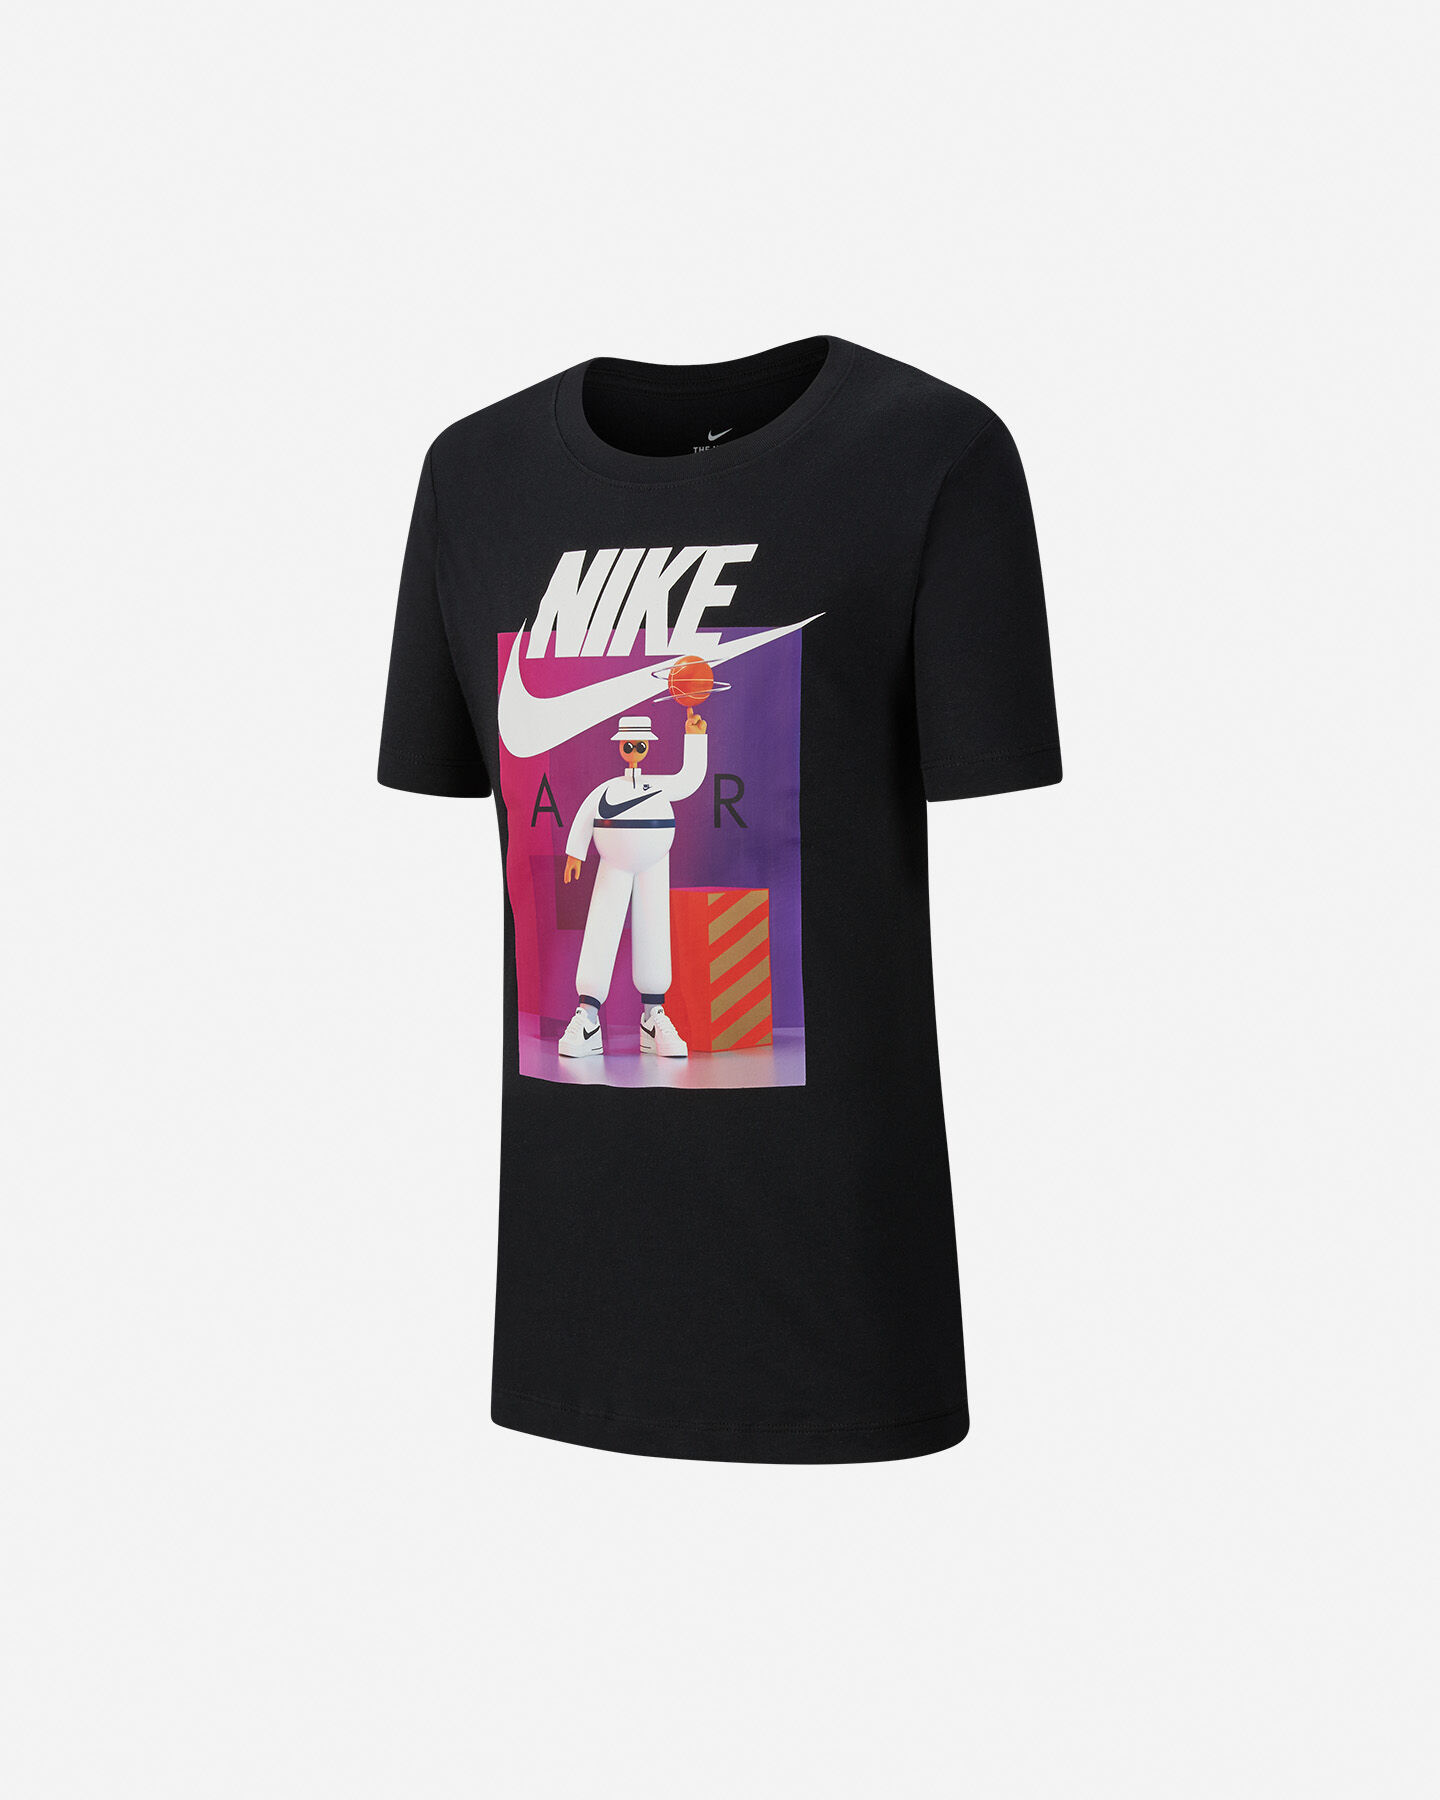  T-Shirt NIKE AIR JR S5223438|010|S scatto 0